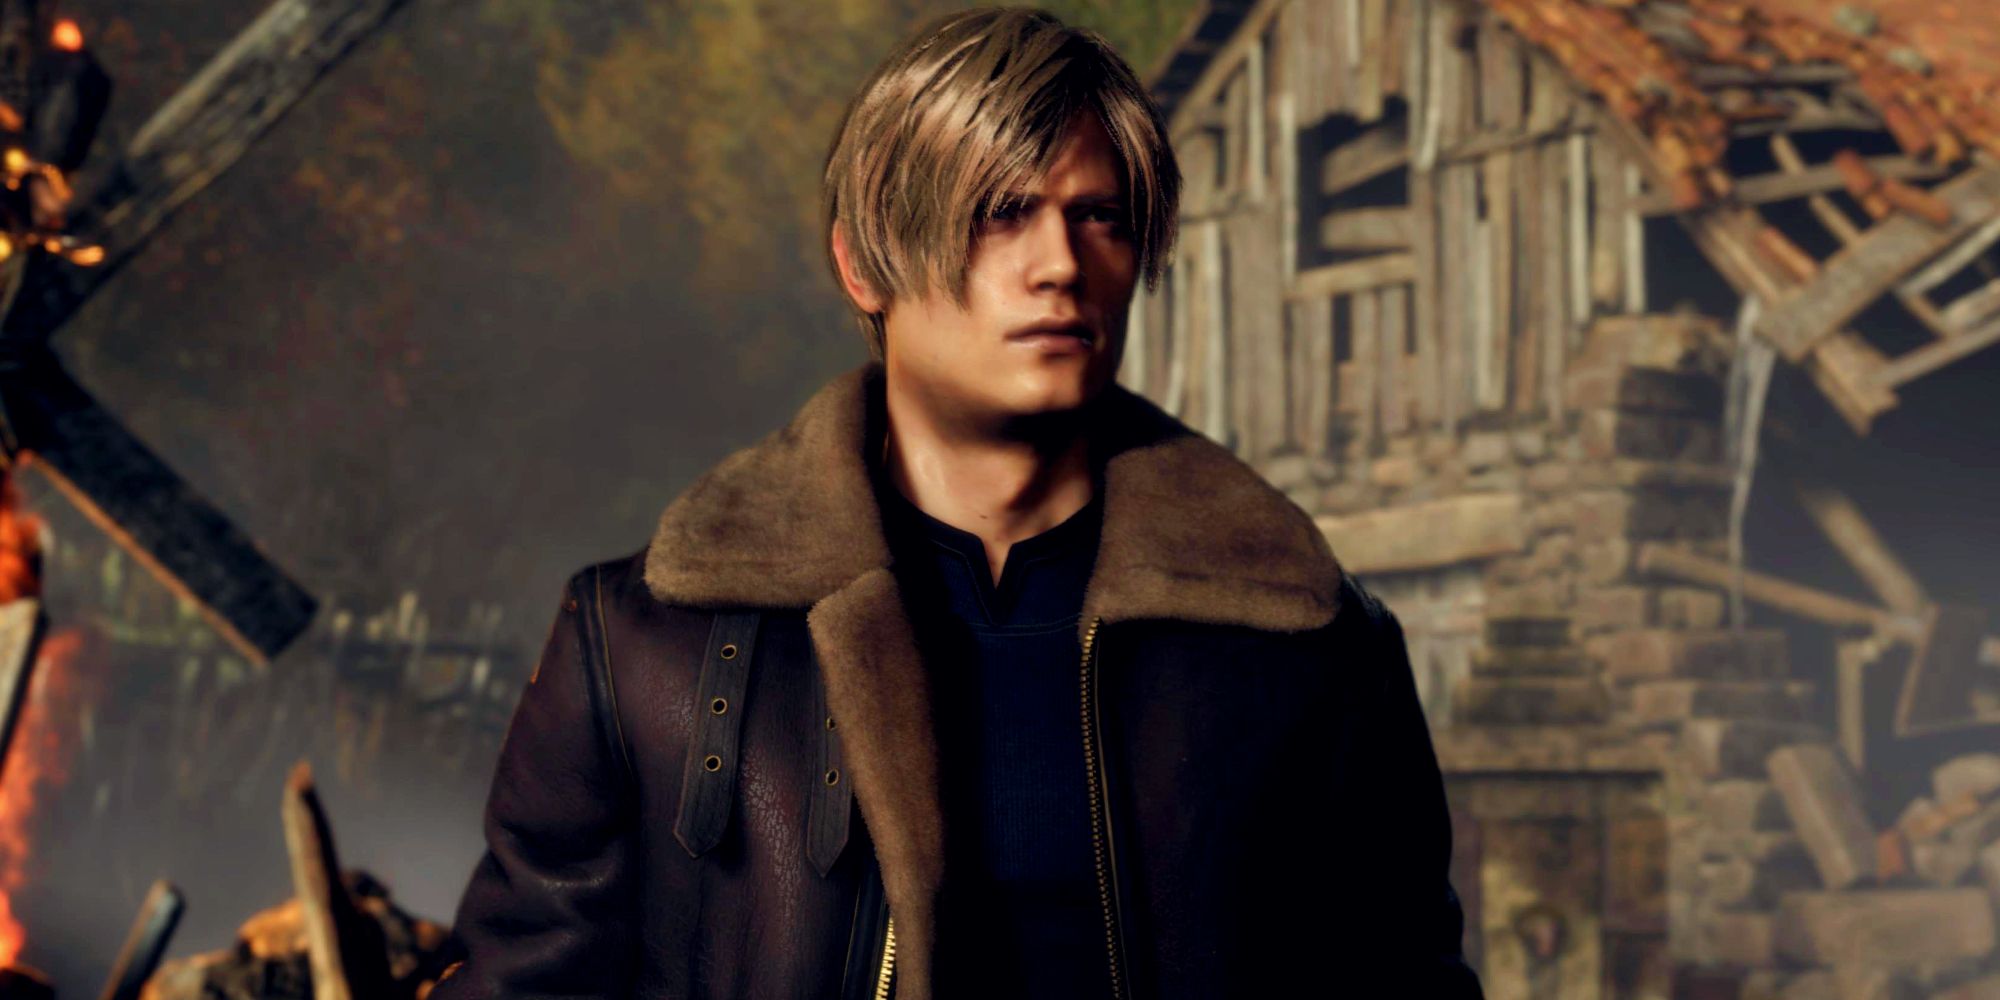 Leon Kennedy standing in a village next to a burning pyre in the Resident Evil 4 remake Chainsaw Demo.